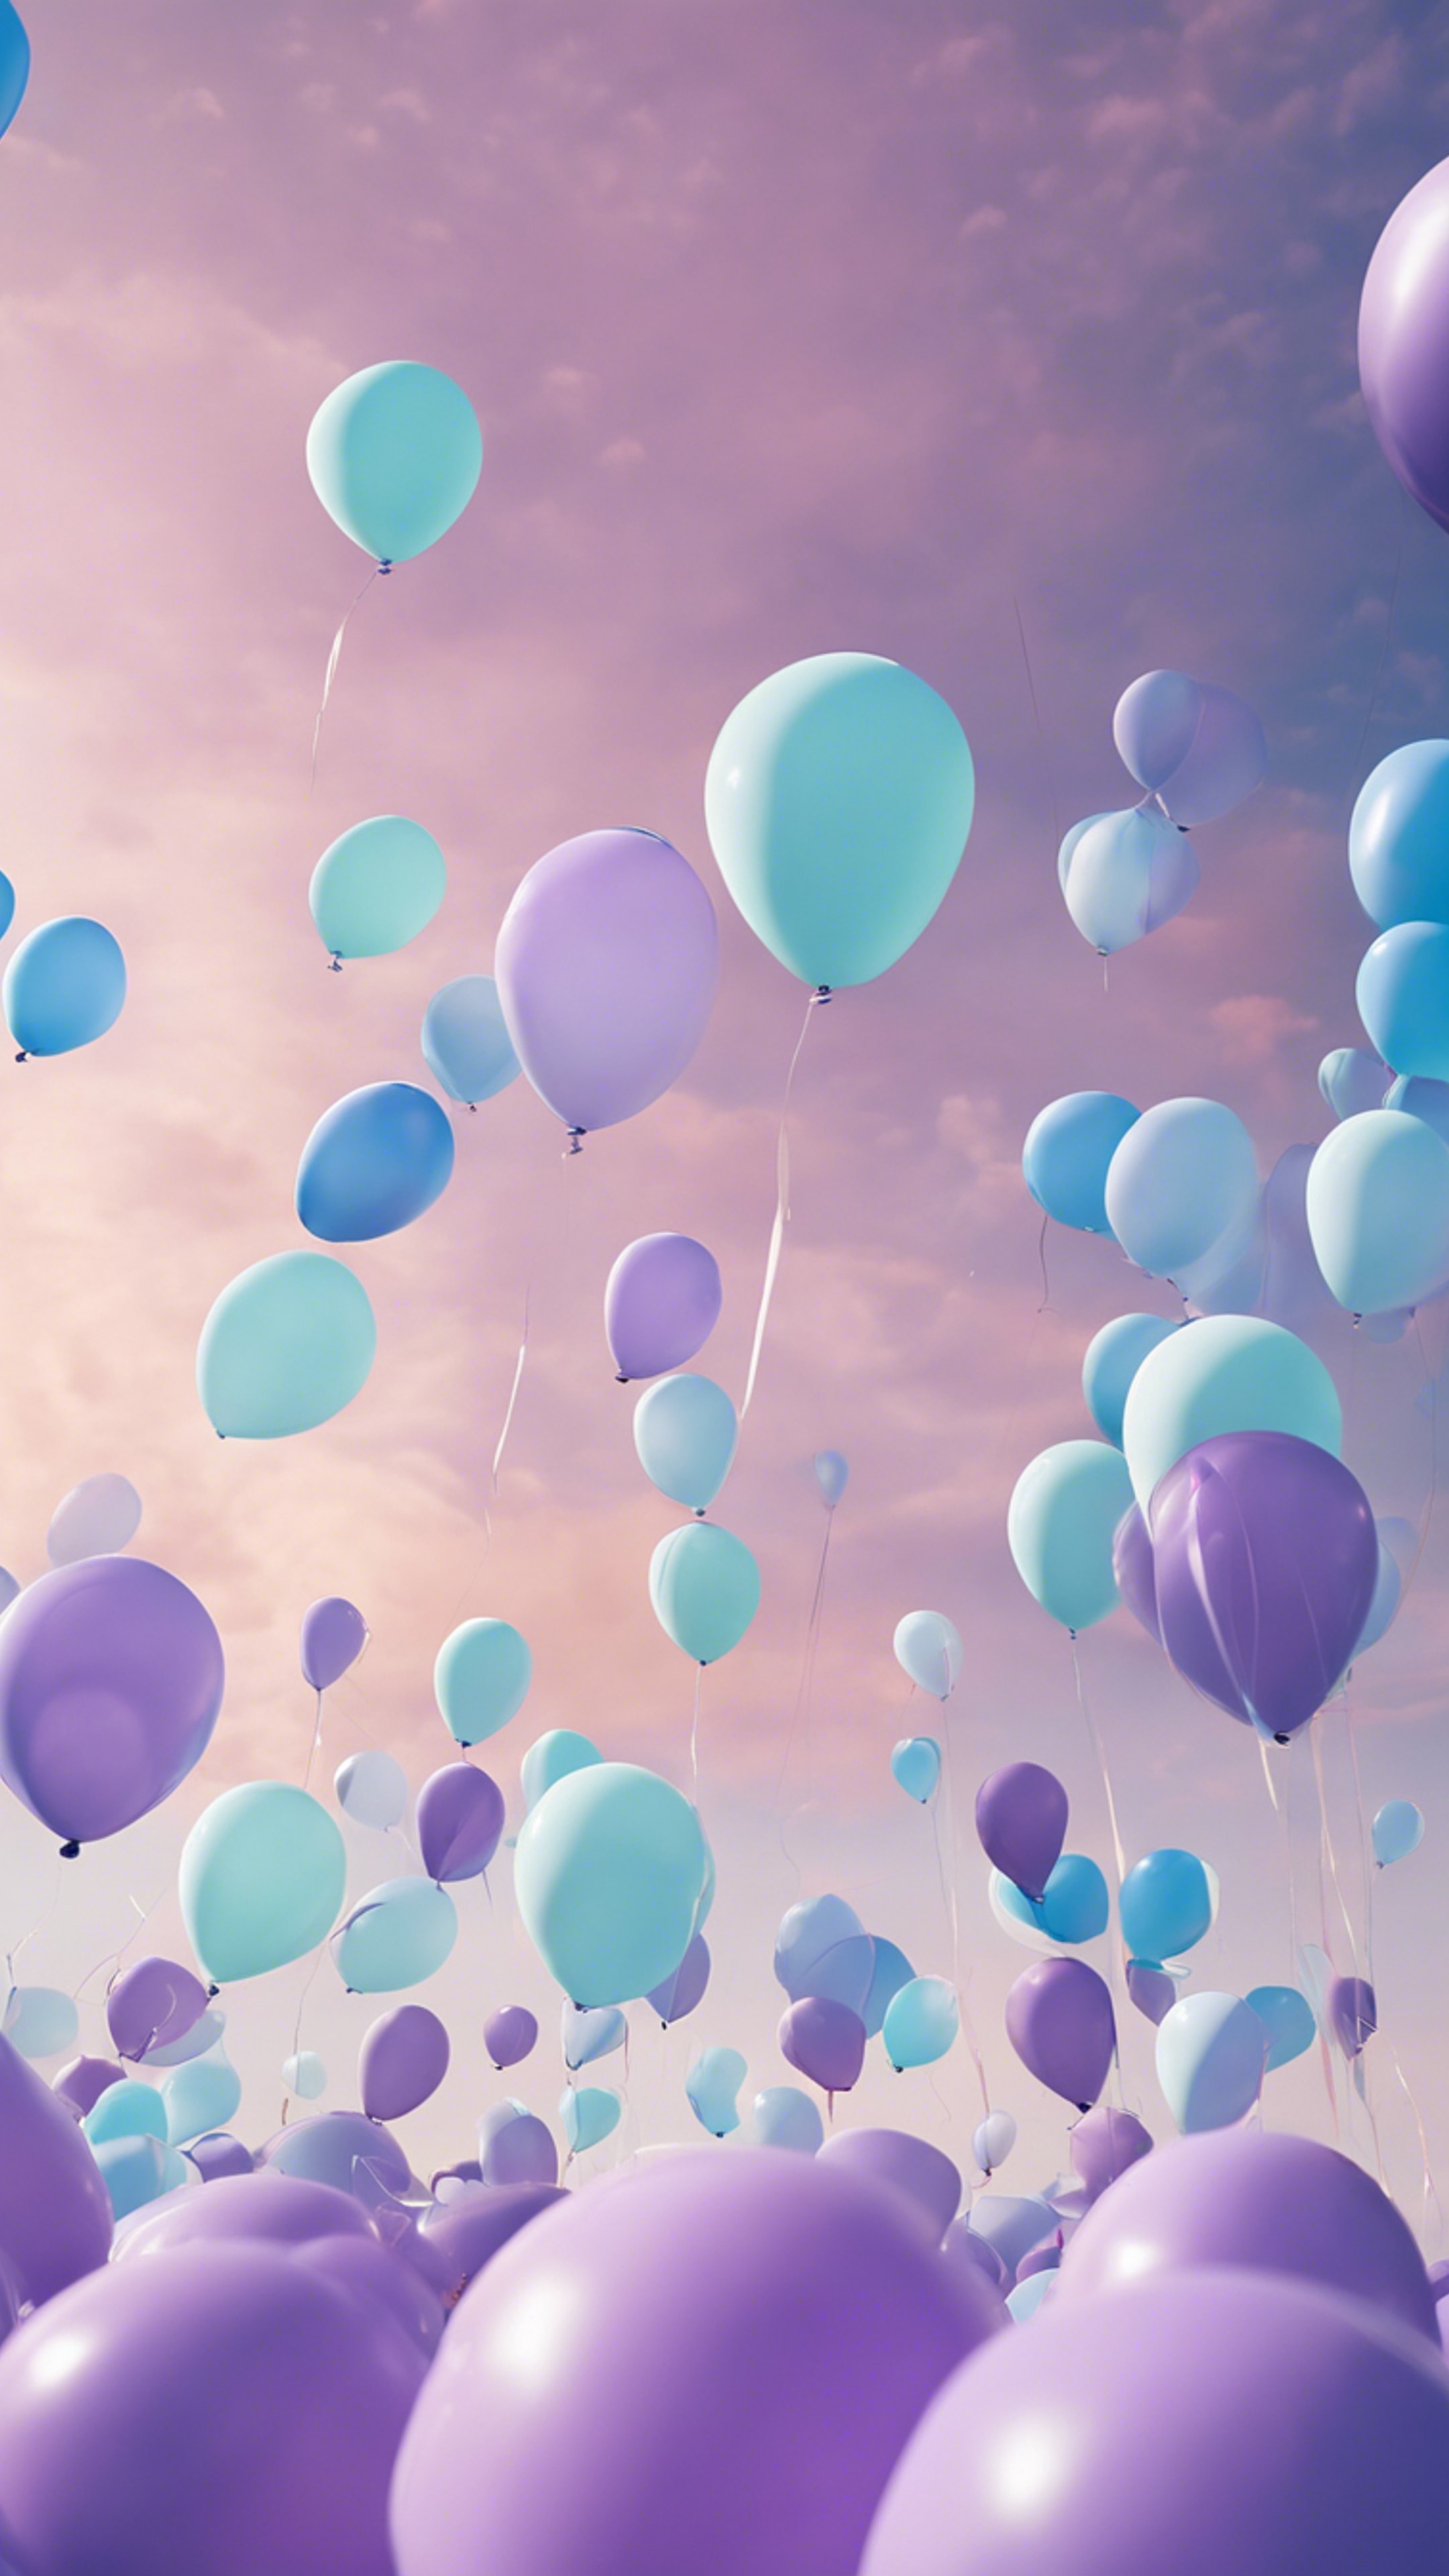 A whimsical scene of pastel purple and blue balloons filling the summer sky. ផ្ទាំង​រូបភាព[fd1f8f768f0047c48fb6]